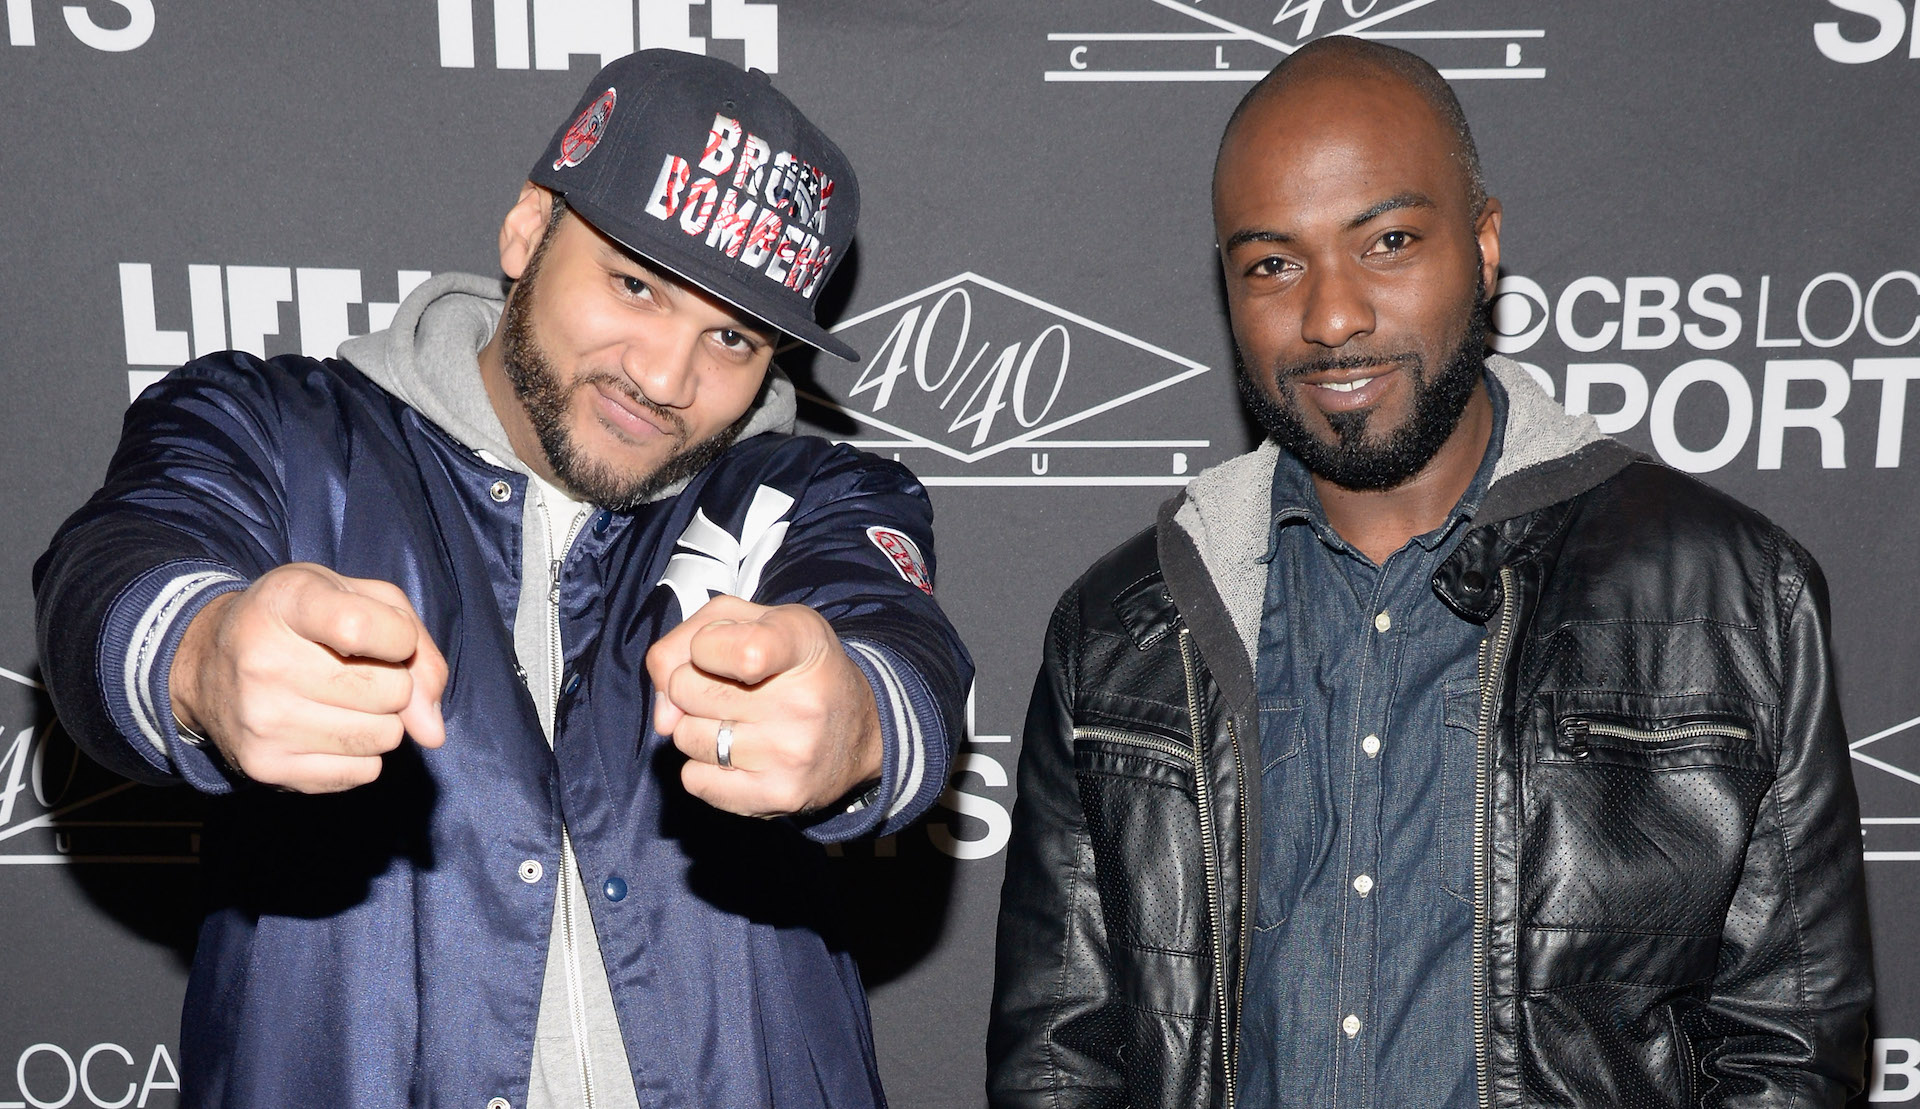 Desus and Mero in 2014 on a red carpet